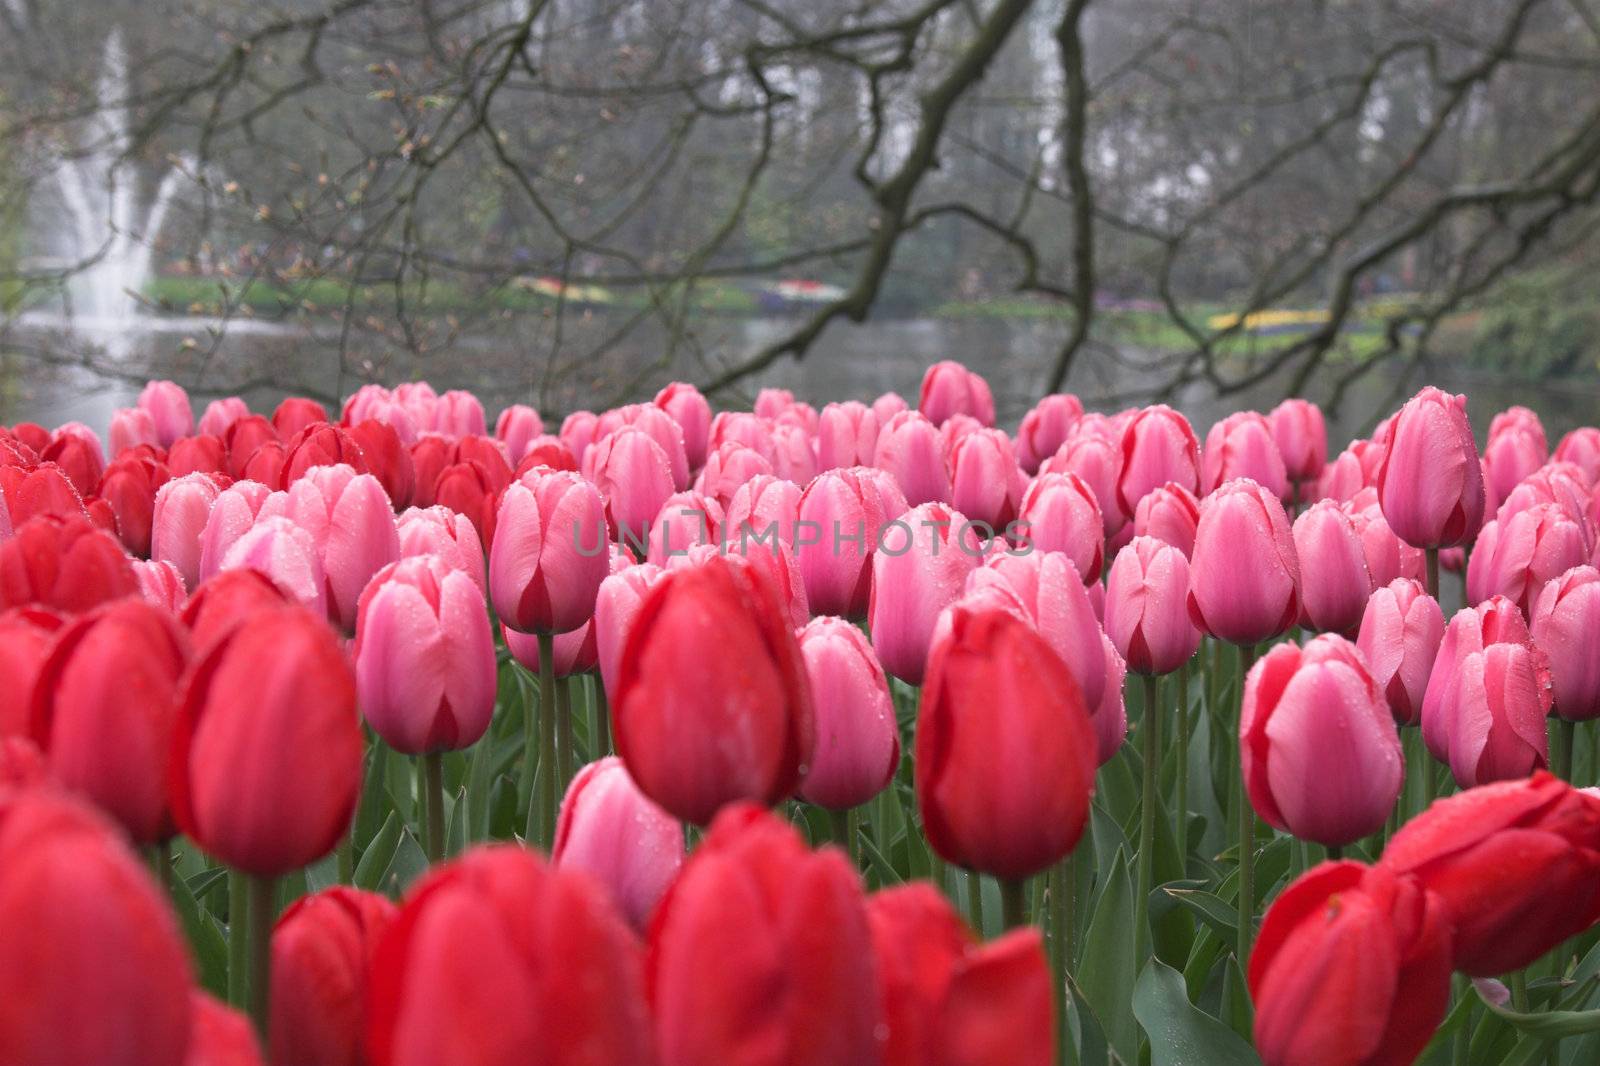 Pretty tulips at the keukenhof on a rainy day (streaks in the background is rain falling down)